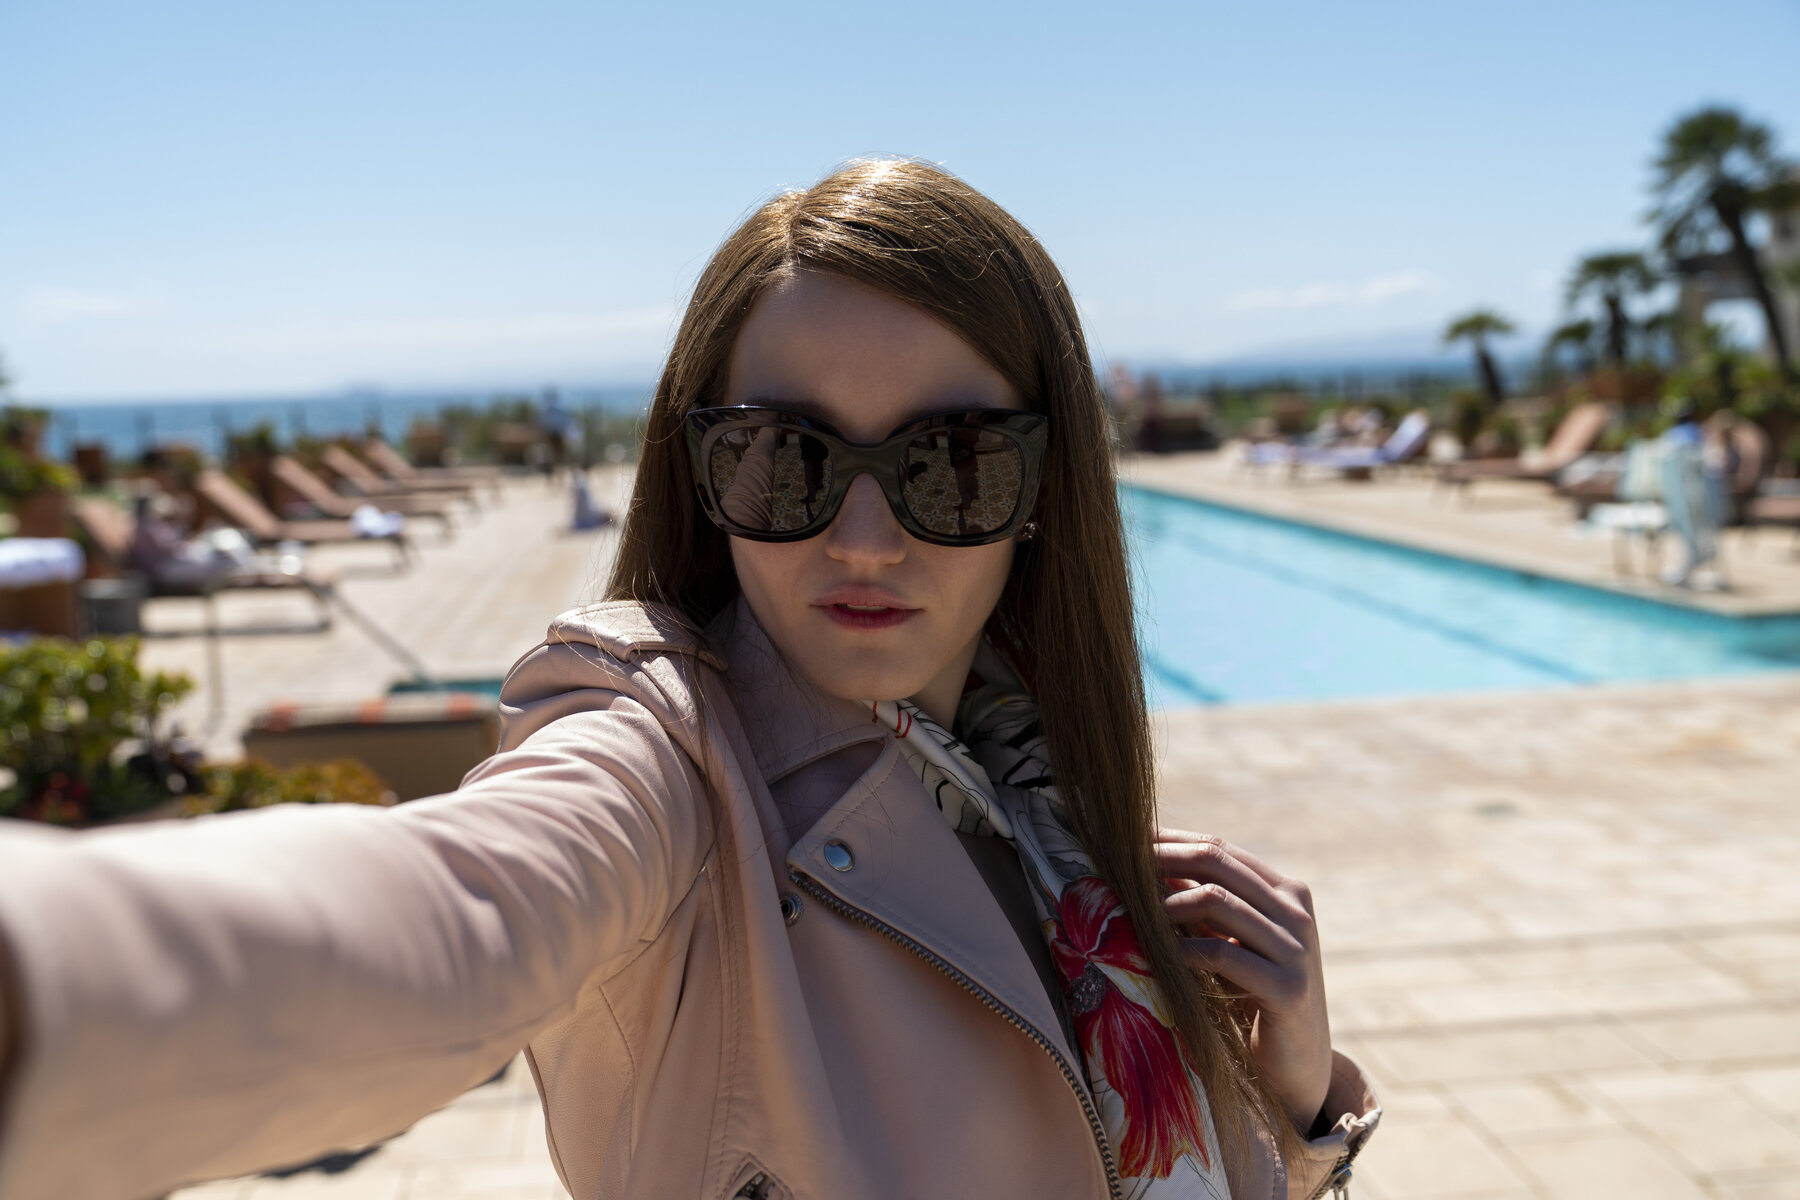 Young woman wearing dark glasses in front of a pool